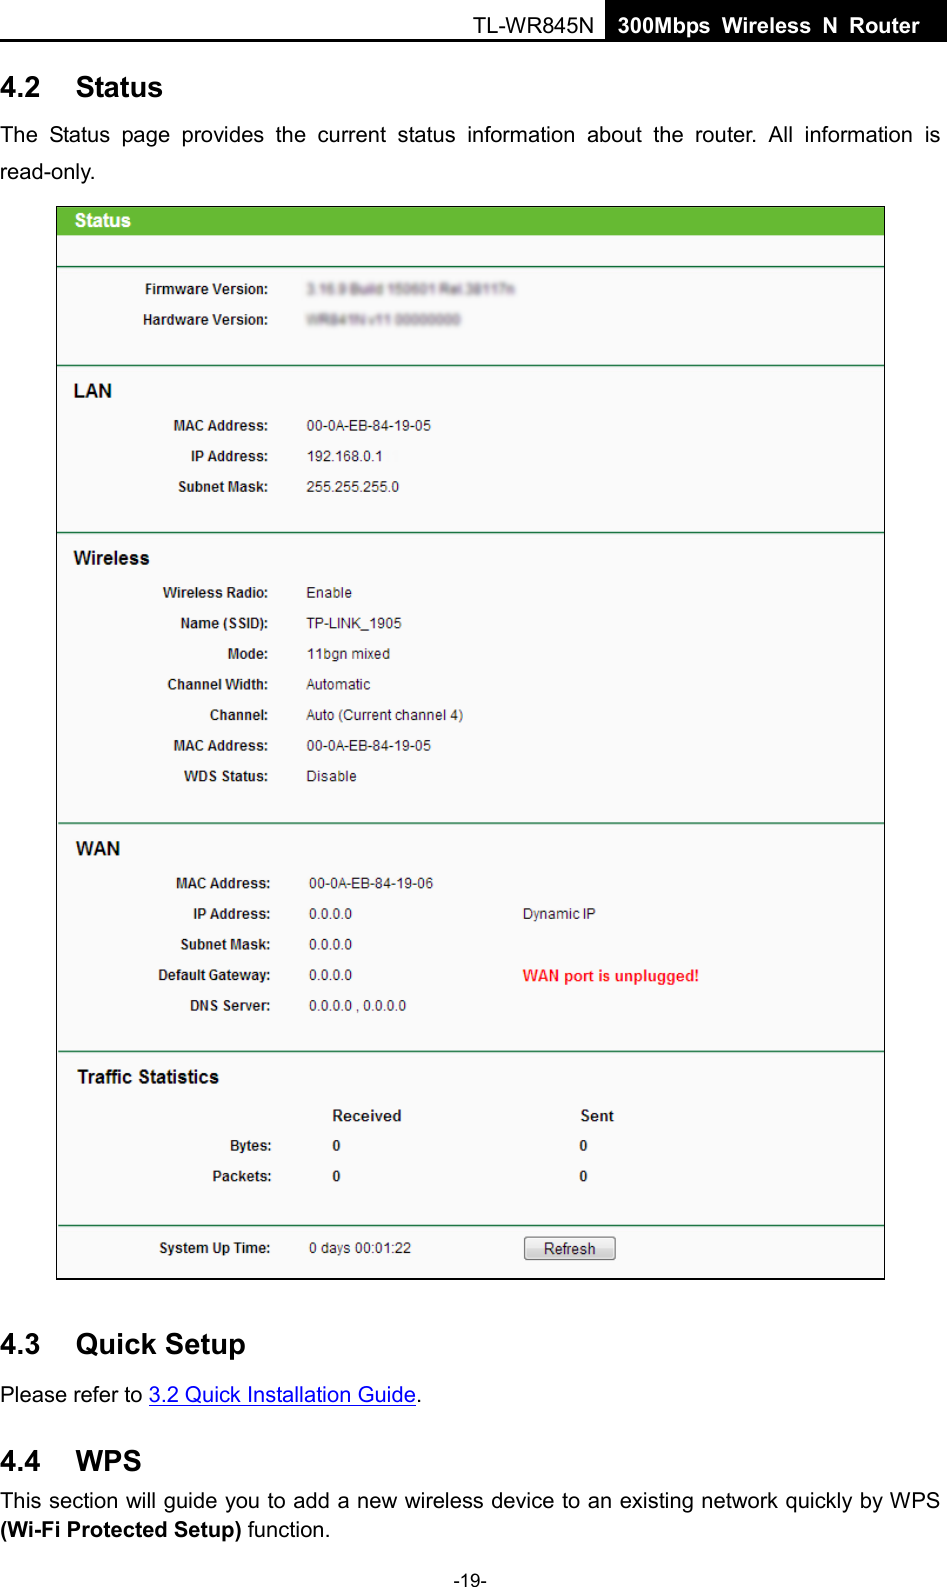  TL-WR845N  300Mbps Wireless N Router    4.2 Status The Status page  provides the  current status information about the  router. All information is read-only.    4.3 Quick Setup Please refer to 3.2 Quick Installation Guide. 4.4 WPS This section will guide you to add a new wireless device to an existing network quickly by WPS (Wi-Fi Protected Setup) function.   -19- 